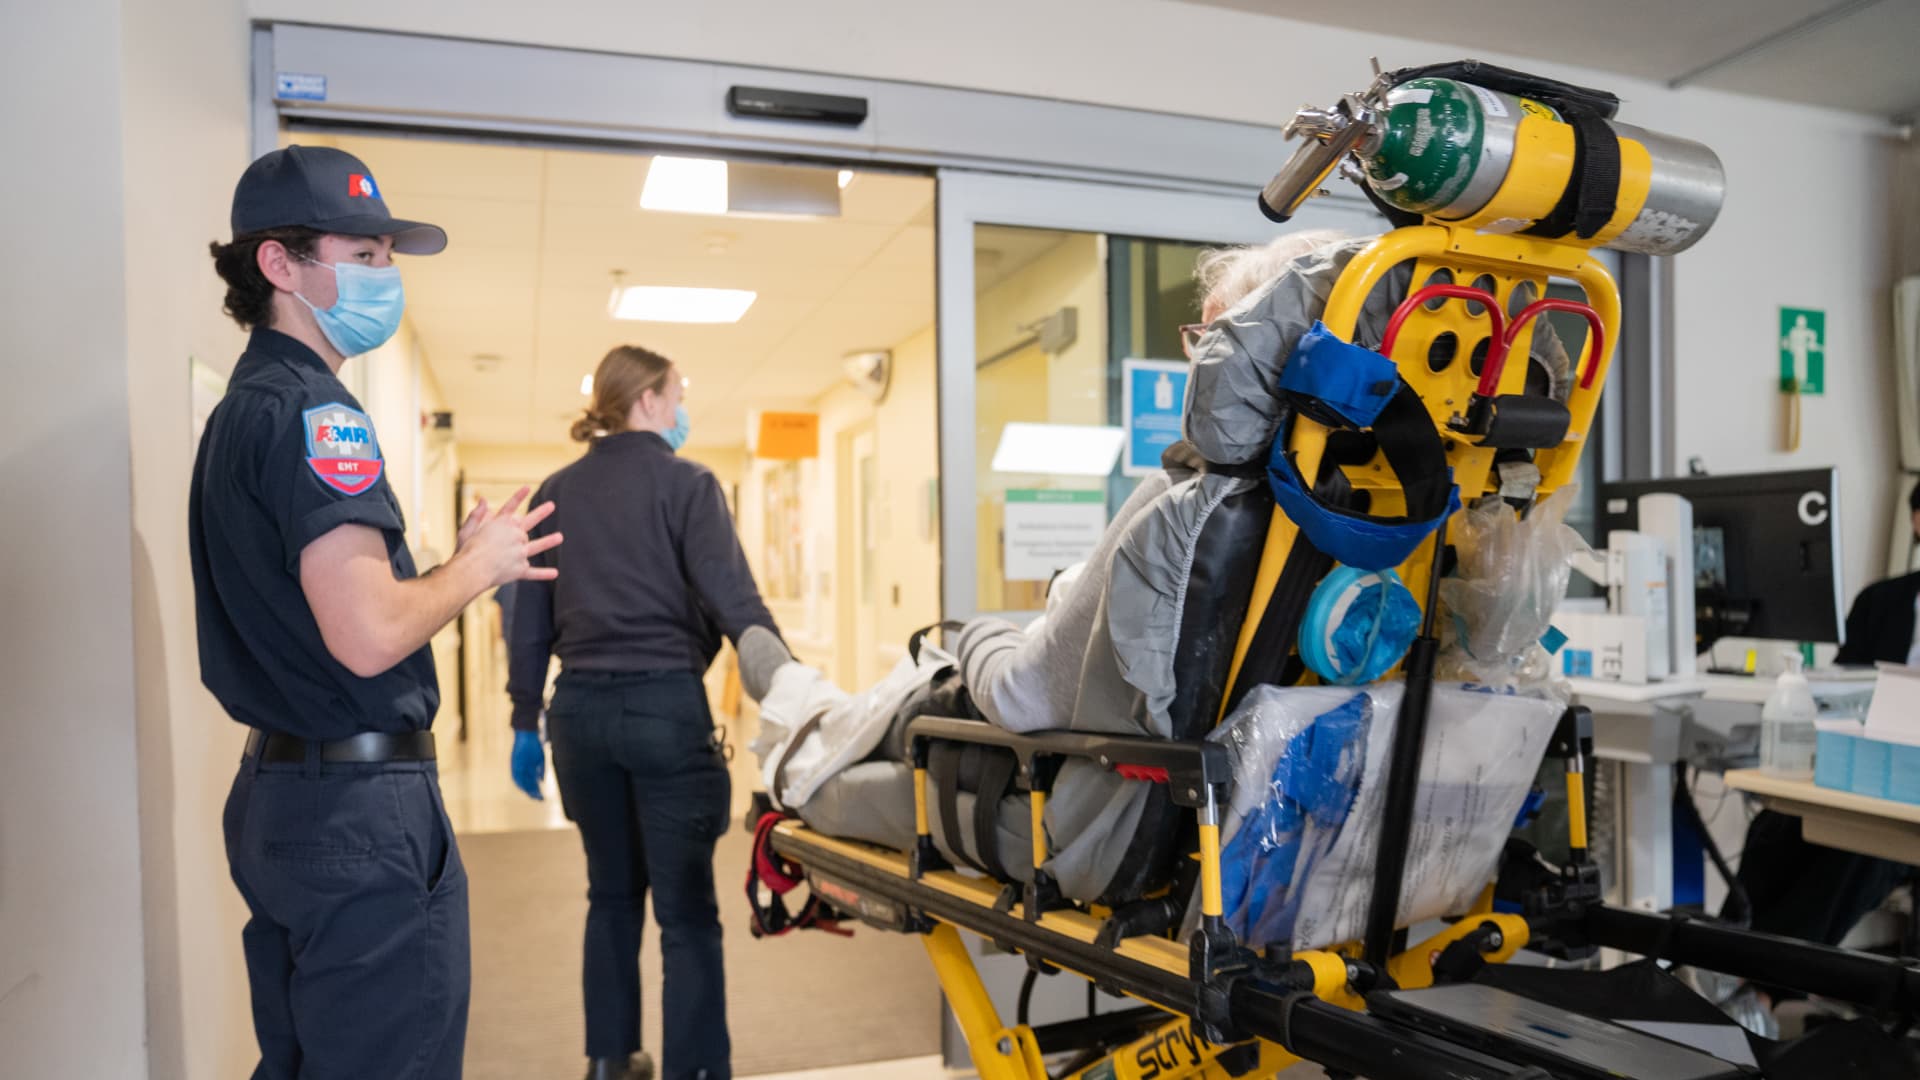 Paramedics arrive with a patient with Covid-19 at the emergency department of Sharp Memorial Hospital in San Diego, California.